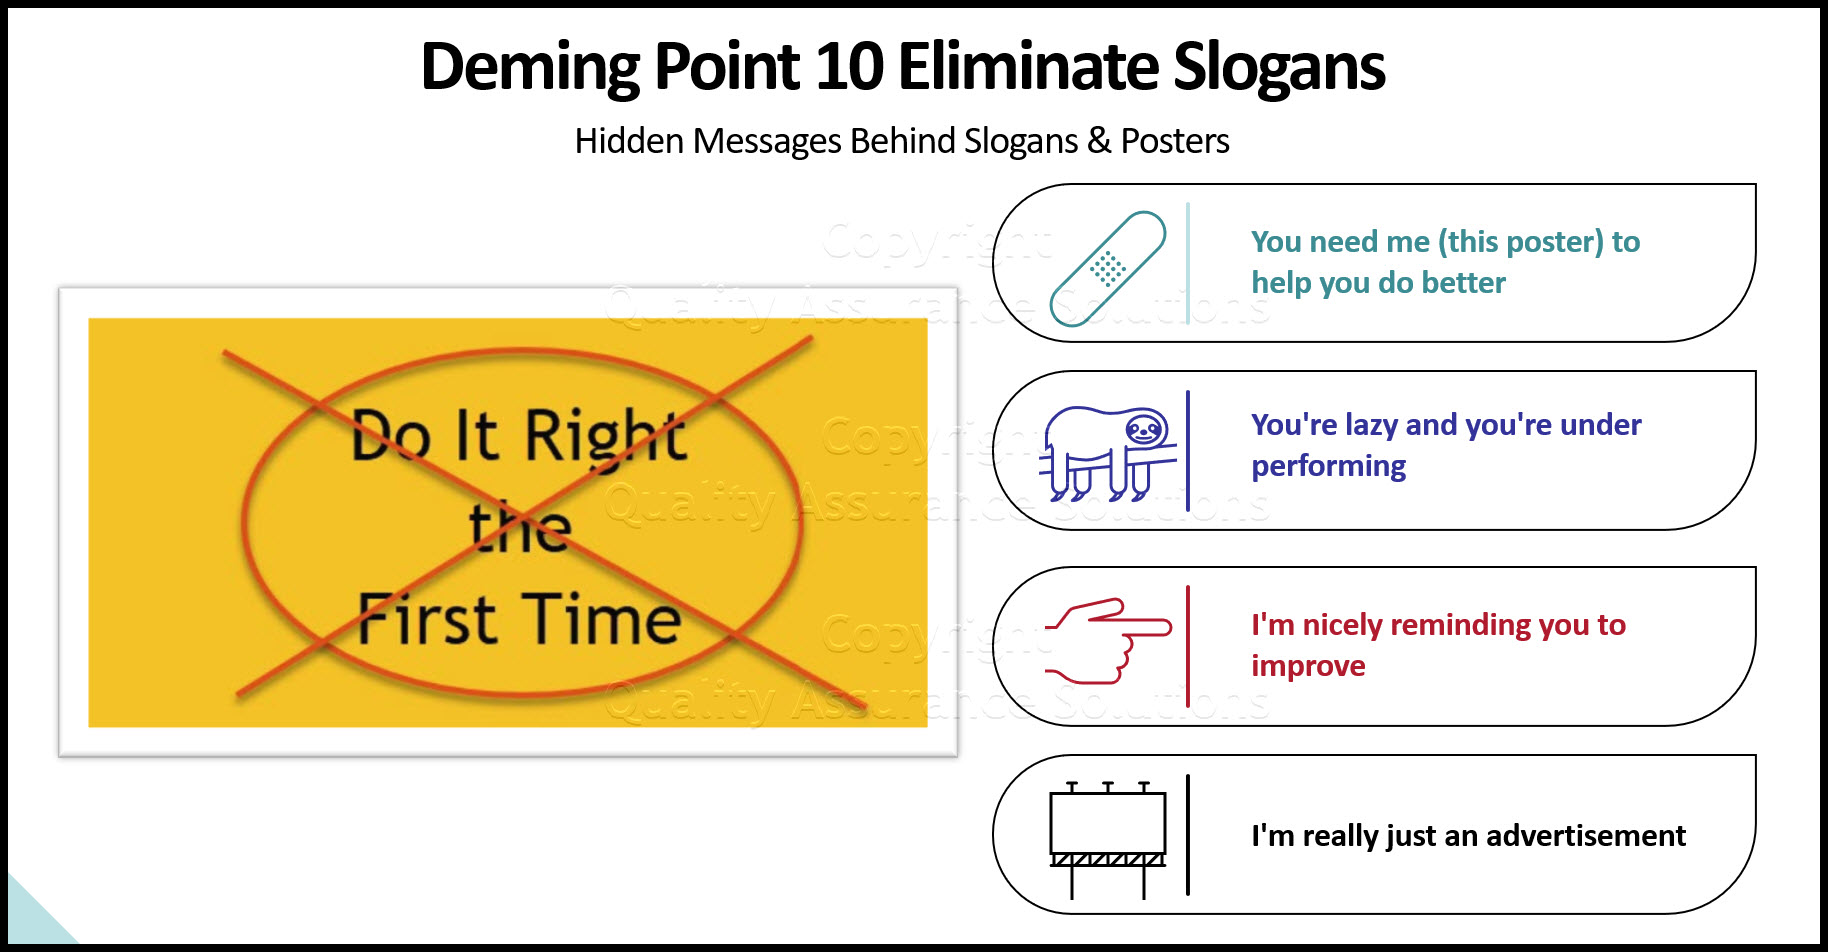 Specific info on Deming Point 10, eliminate slogans, exhortations, and targets for the work force